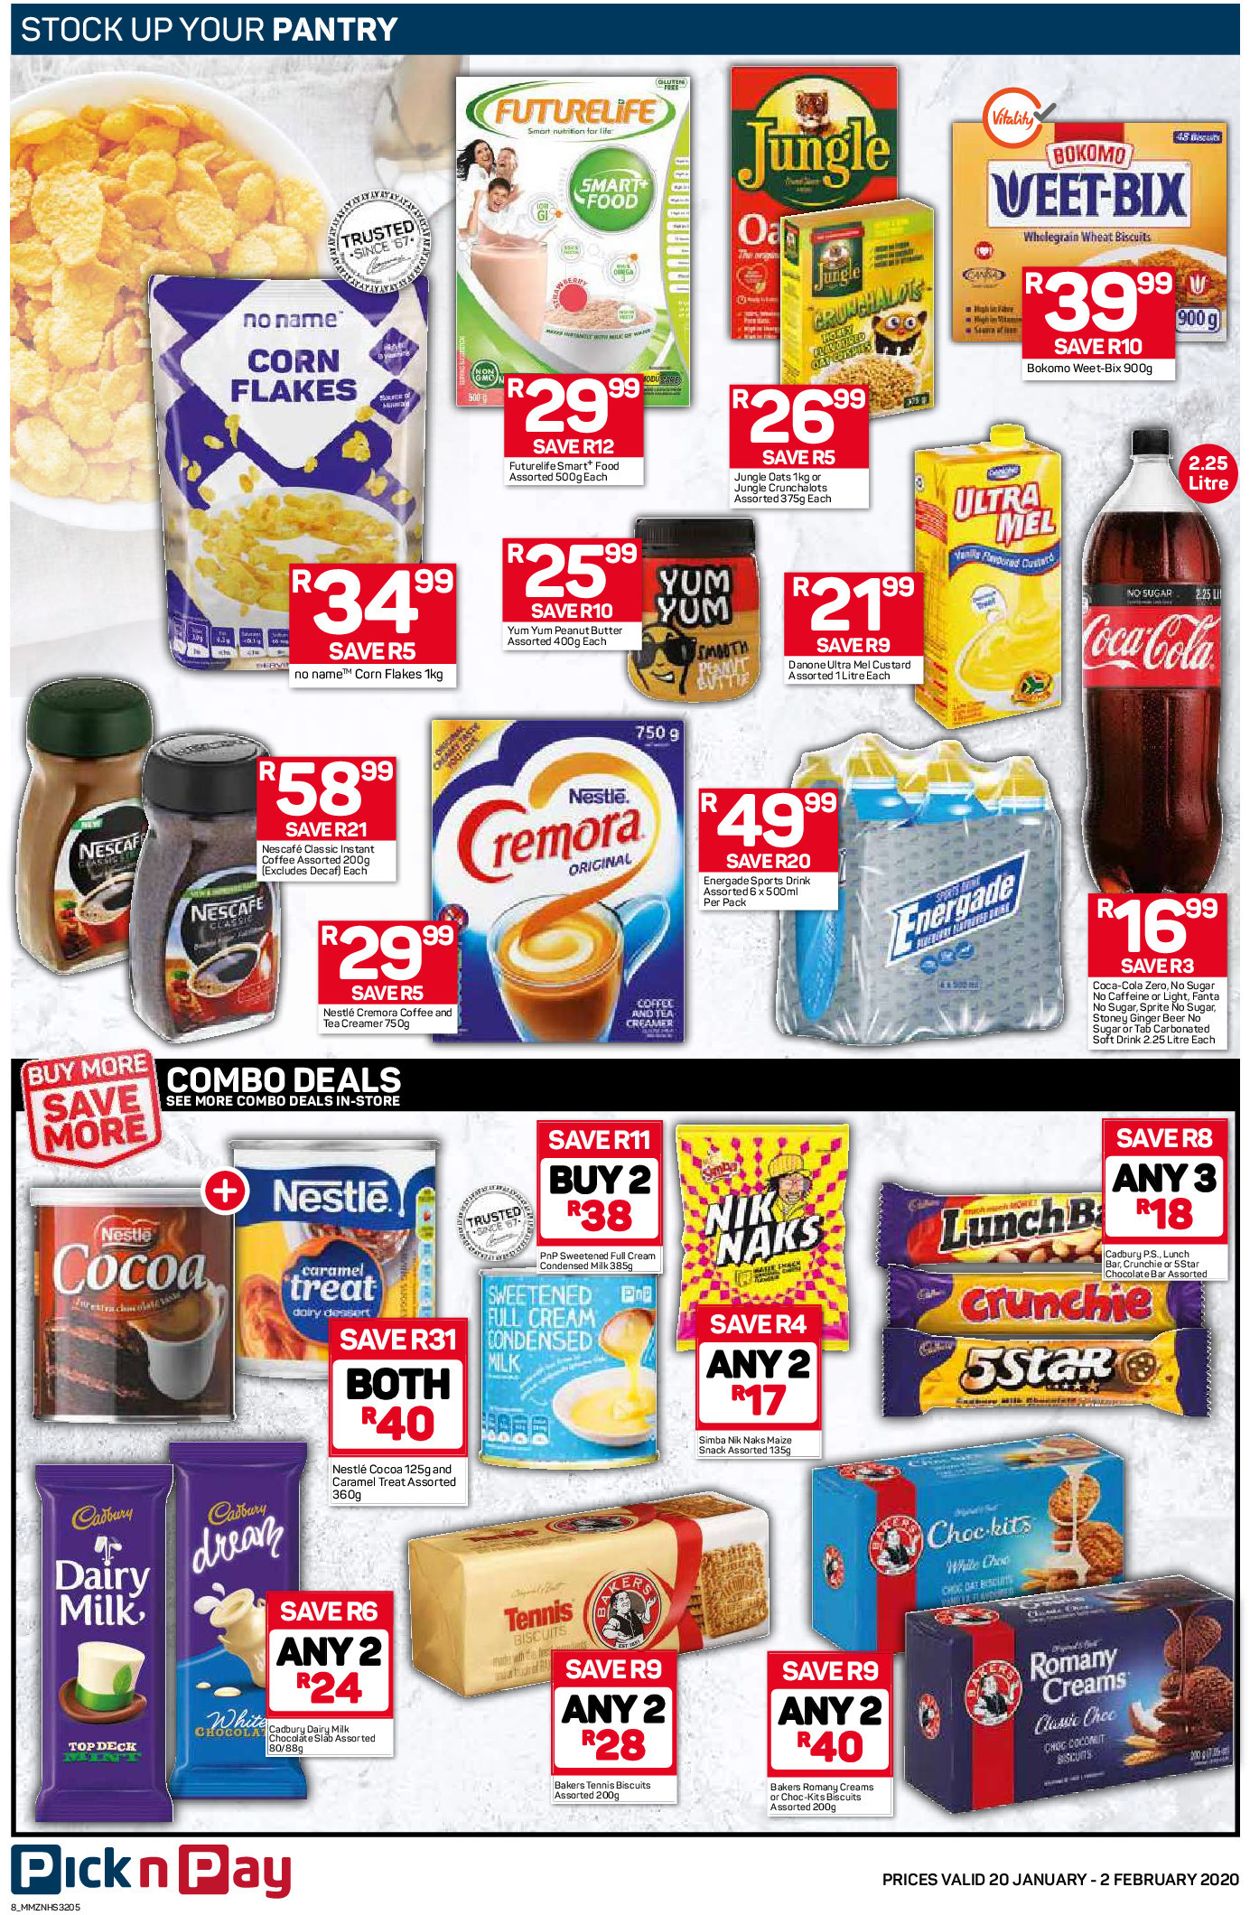 Pick n Pay Catalogue - 2020/01/20-2020/02/02 (Page 9)